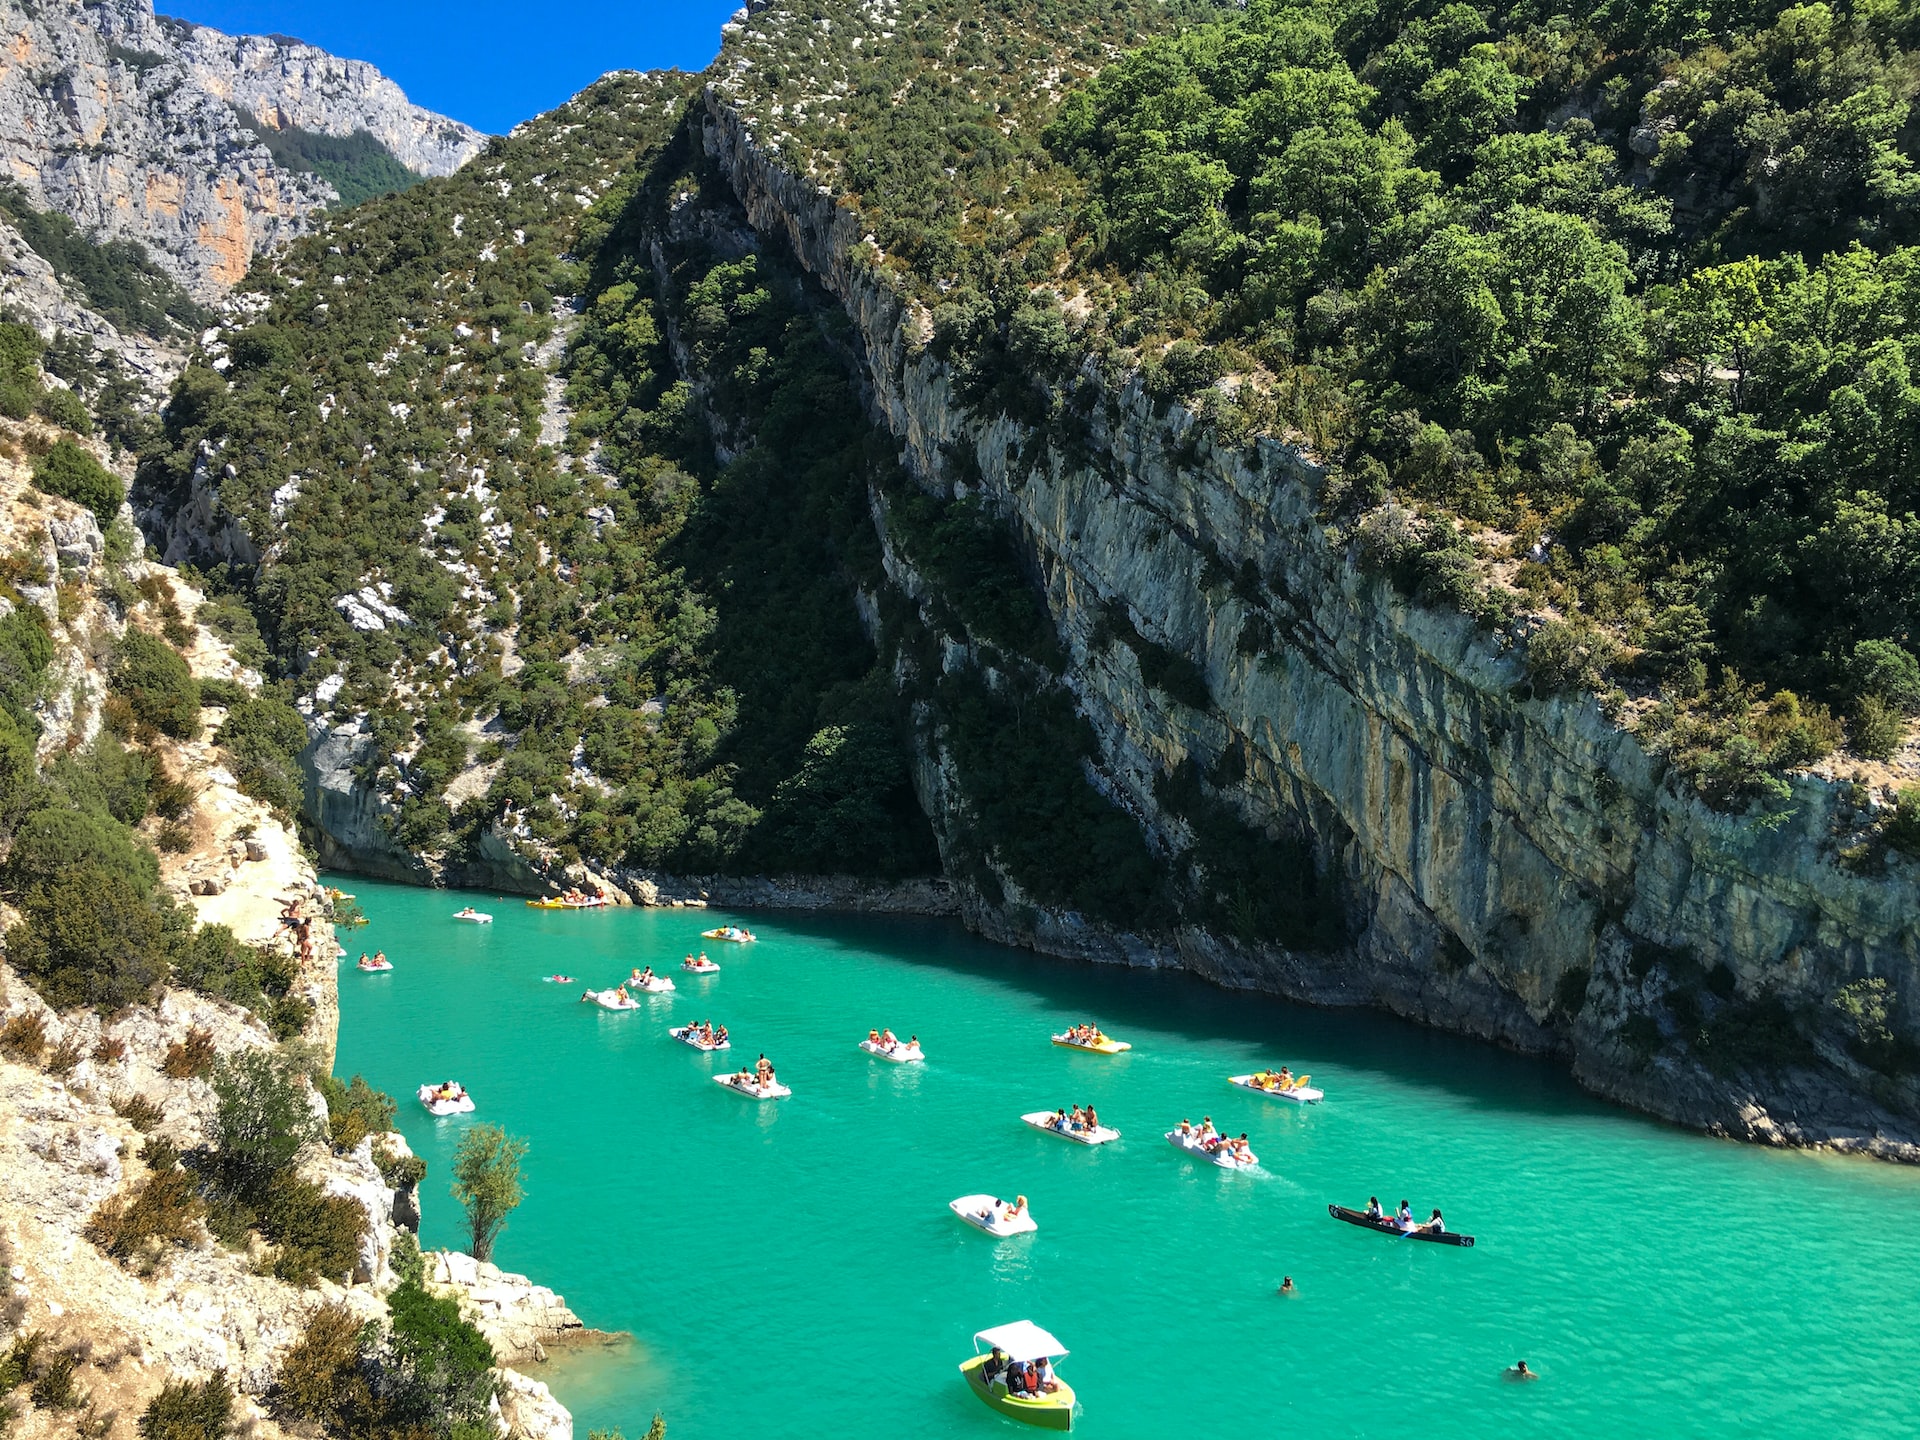 Travel guide to South of France : Don't miss nature!
